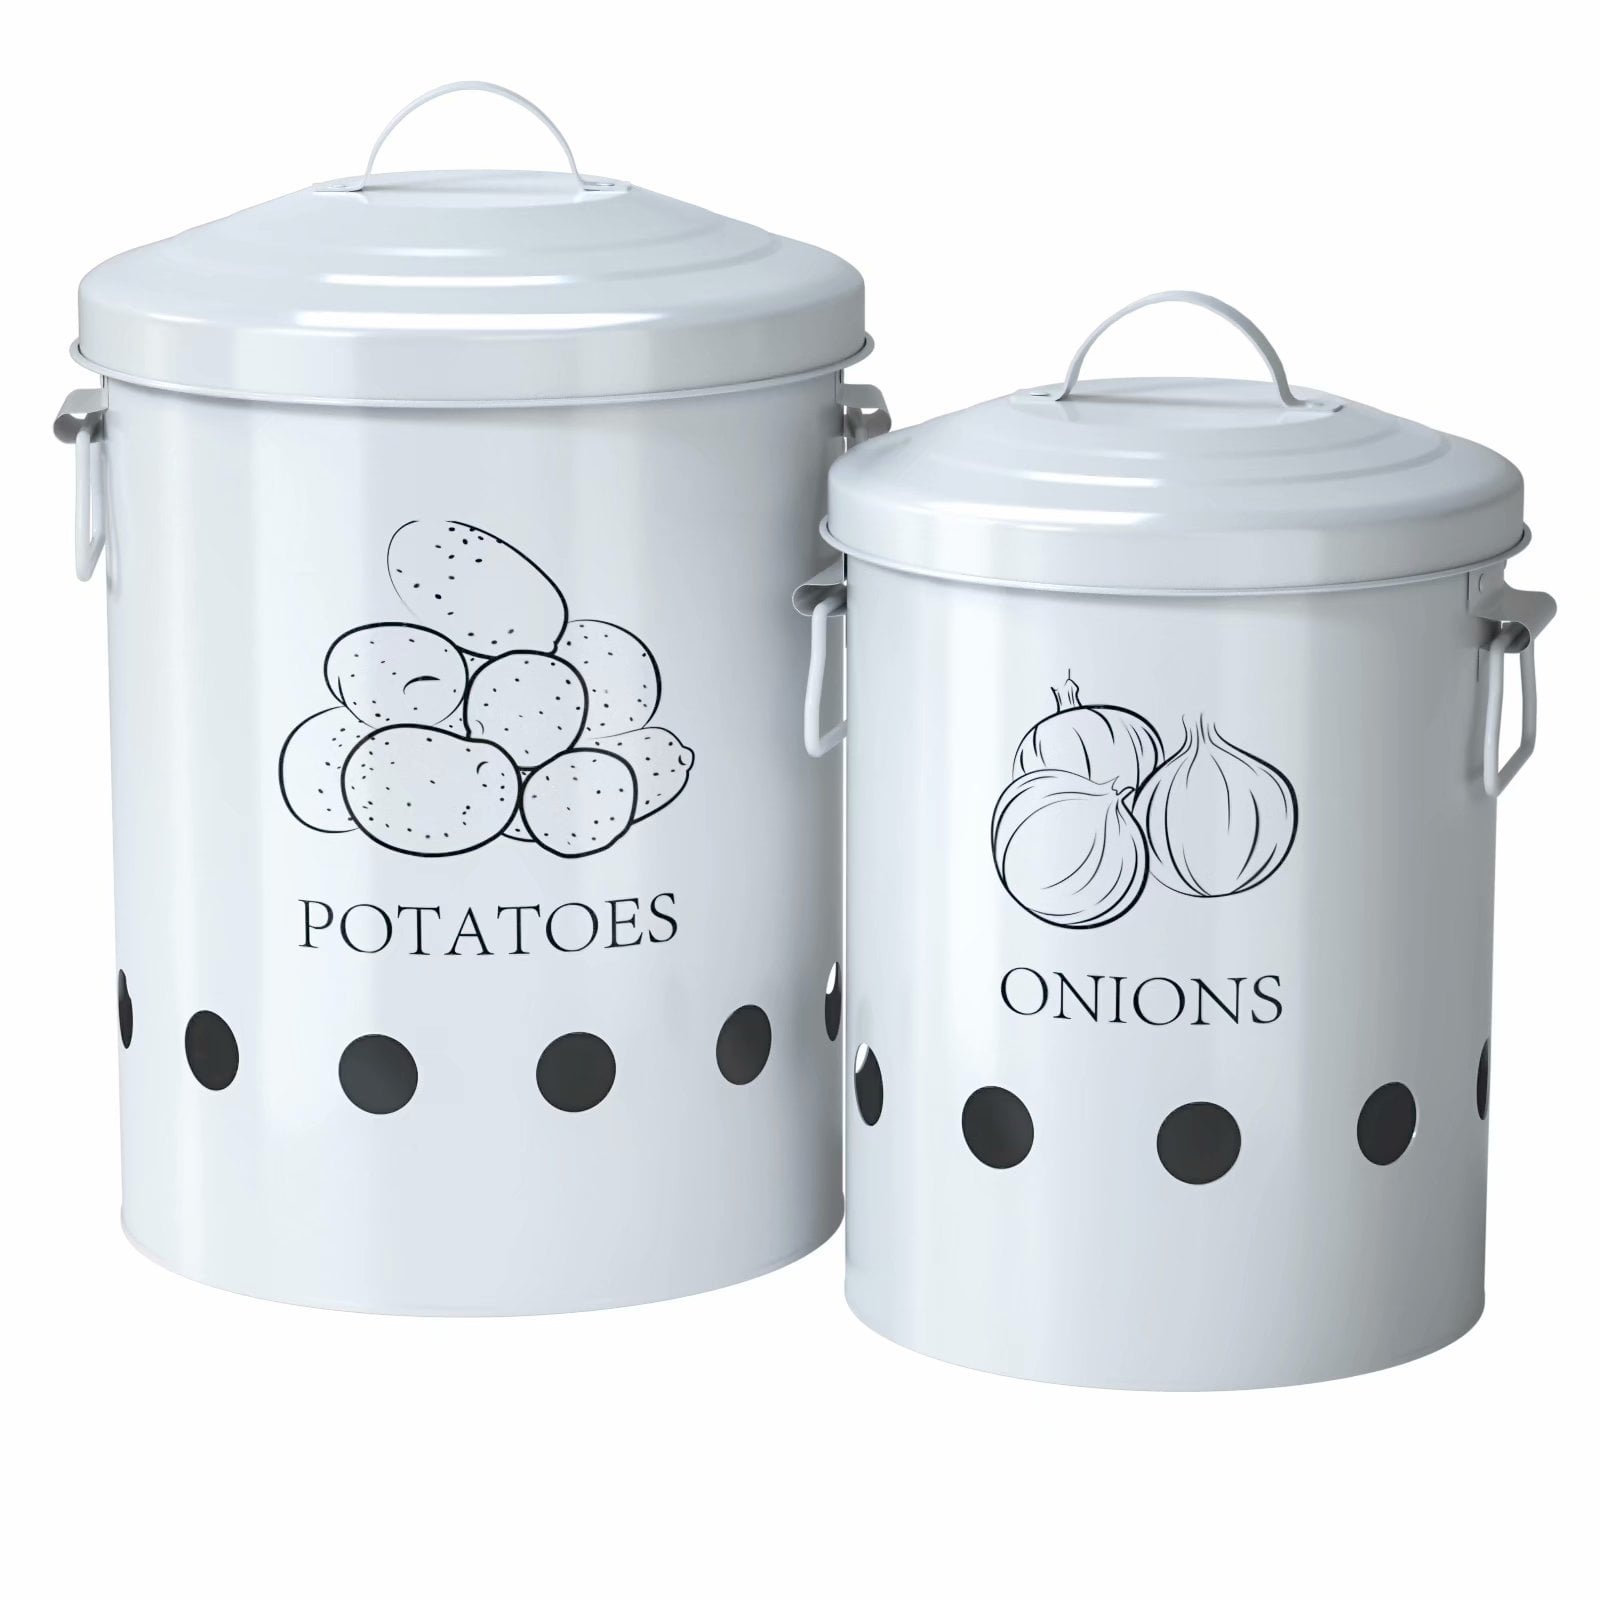 Kook Potato, Onion & Garlic Kitchen Storage Canisters, Rustic Farmhouse Containers with Aerating Holes, Vintage Vegetable Tins, Set of 3, 5 Liter, 2